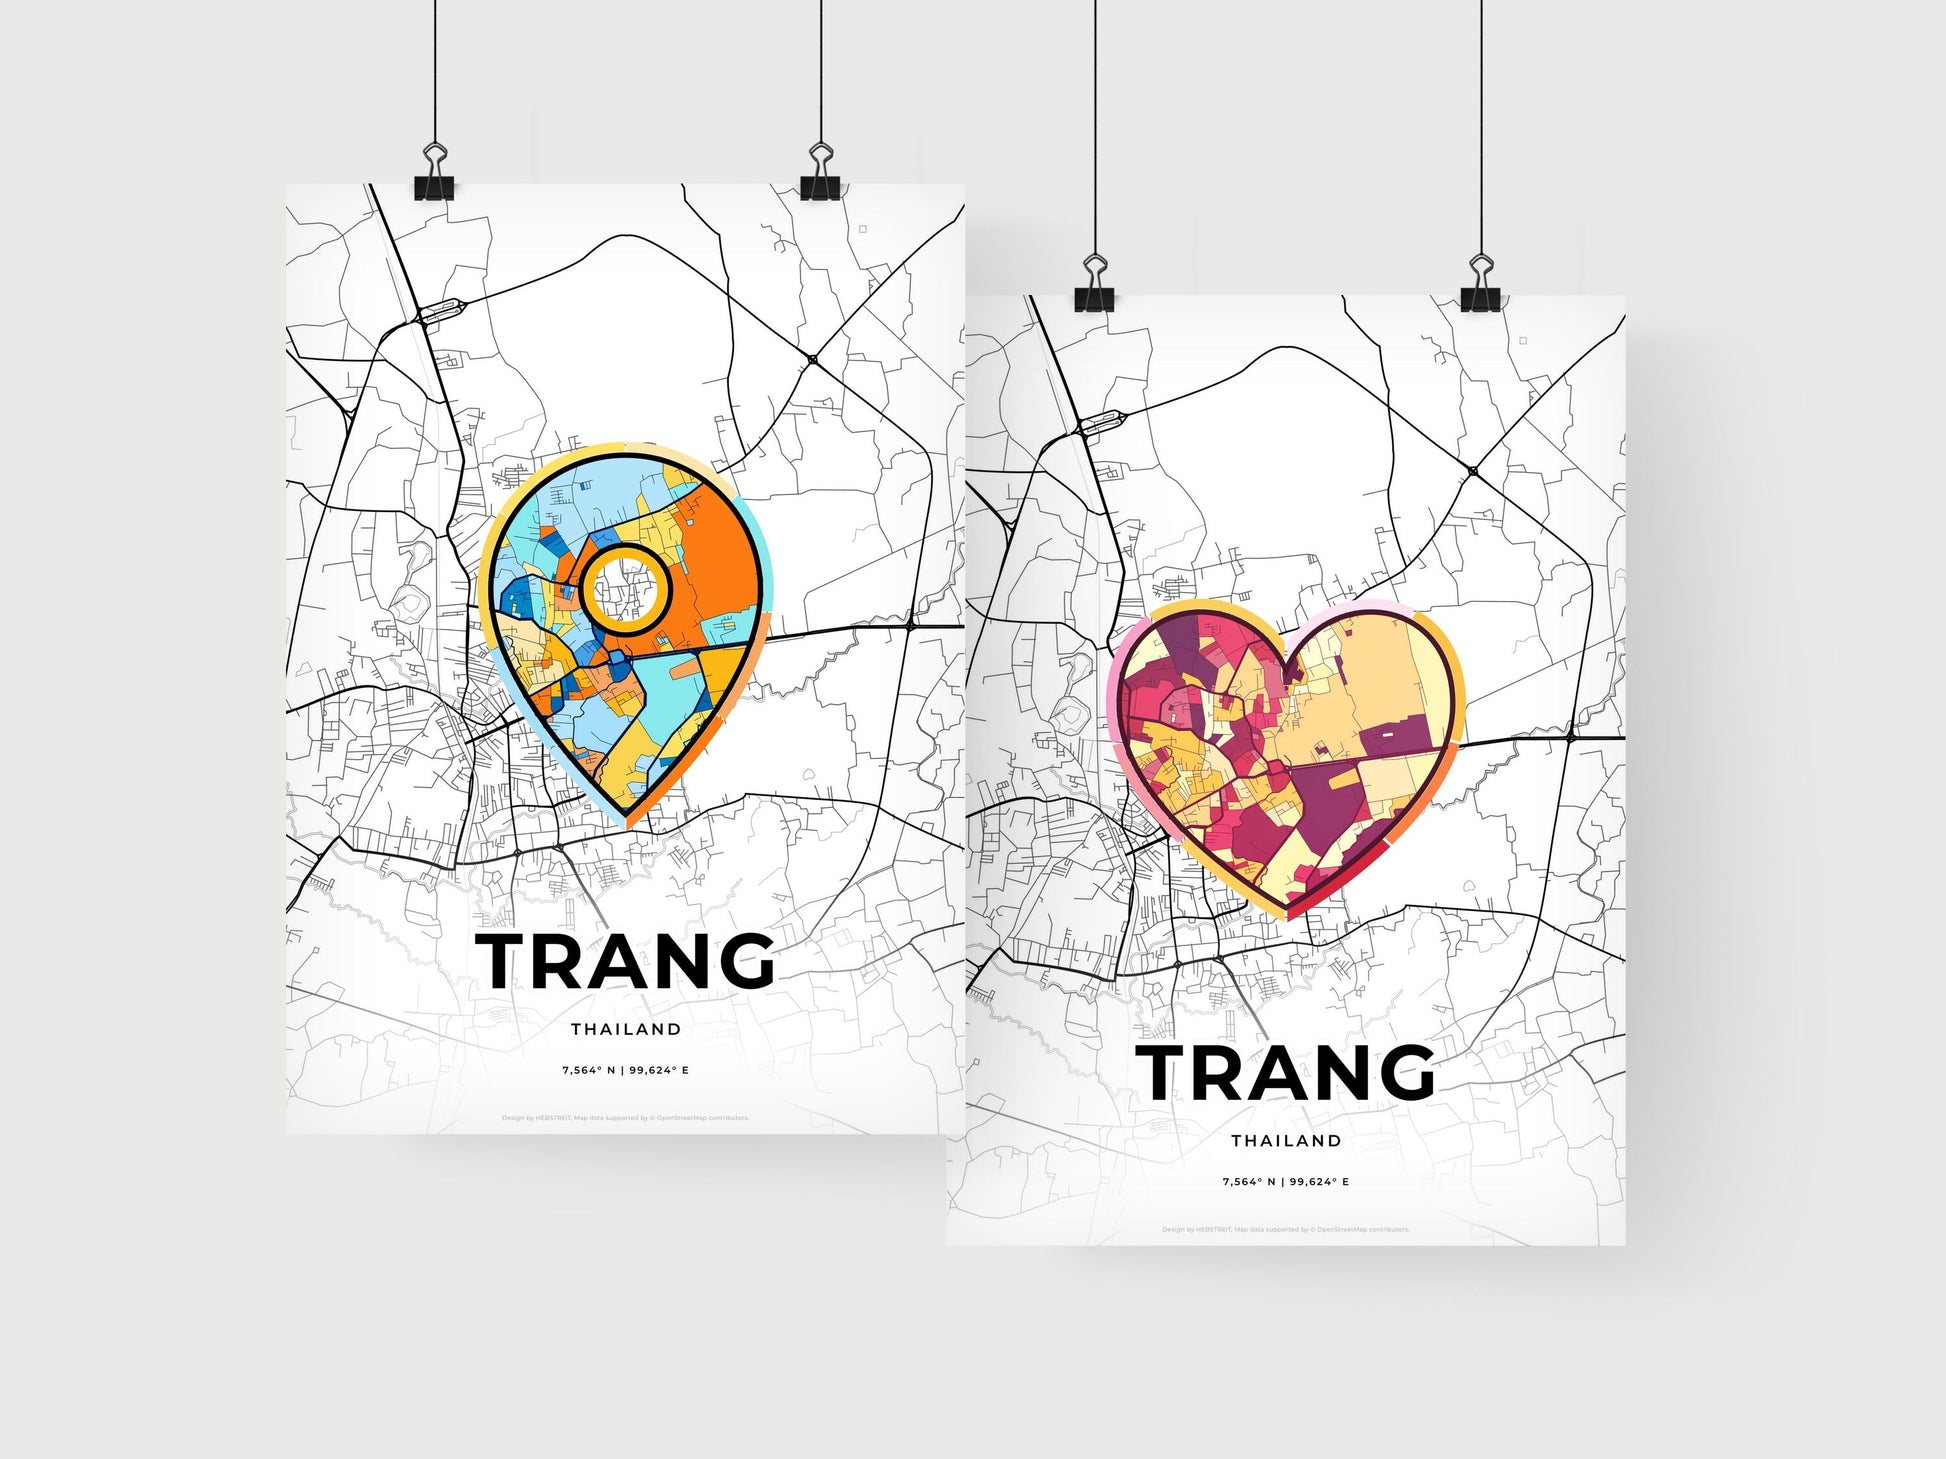 TRANG THAILAND minimal art map with a colorful icon.